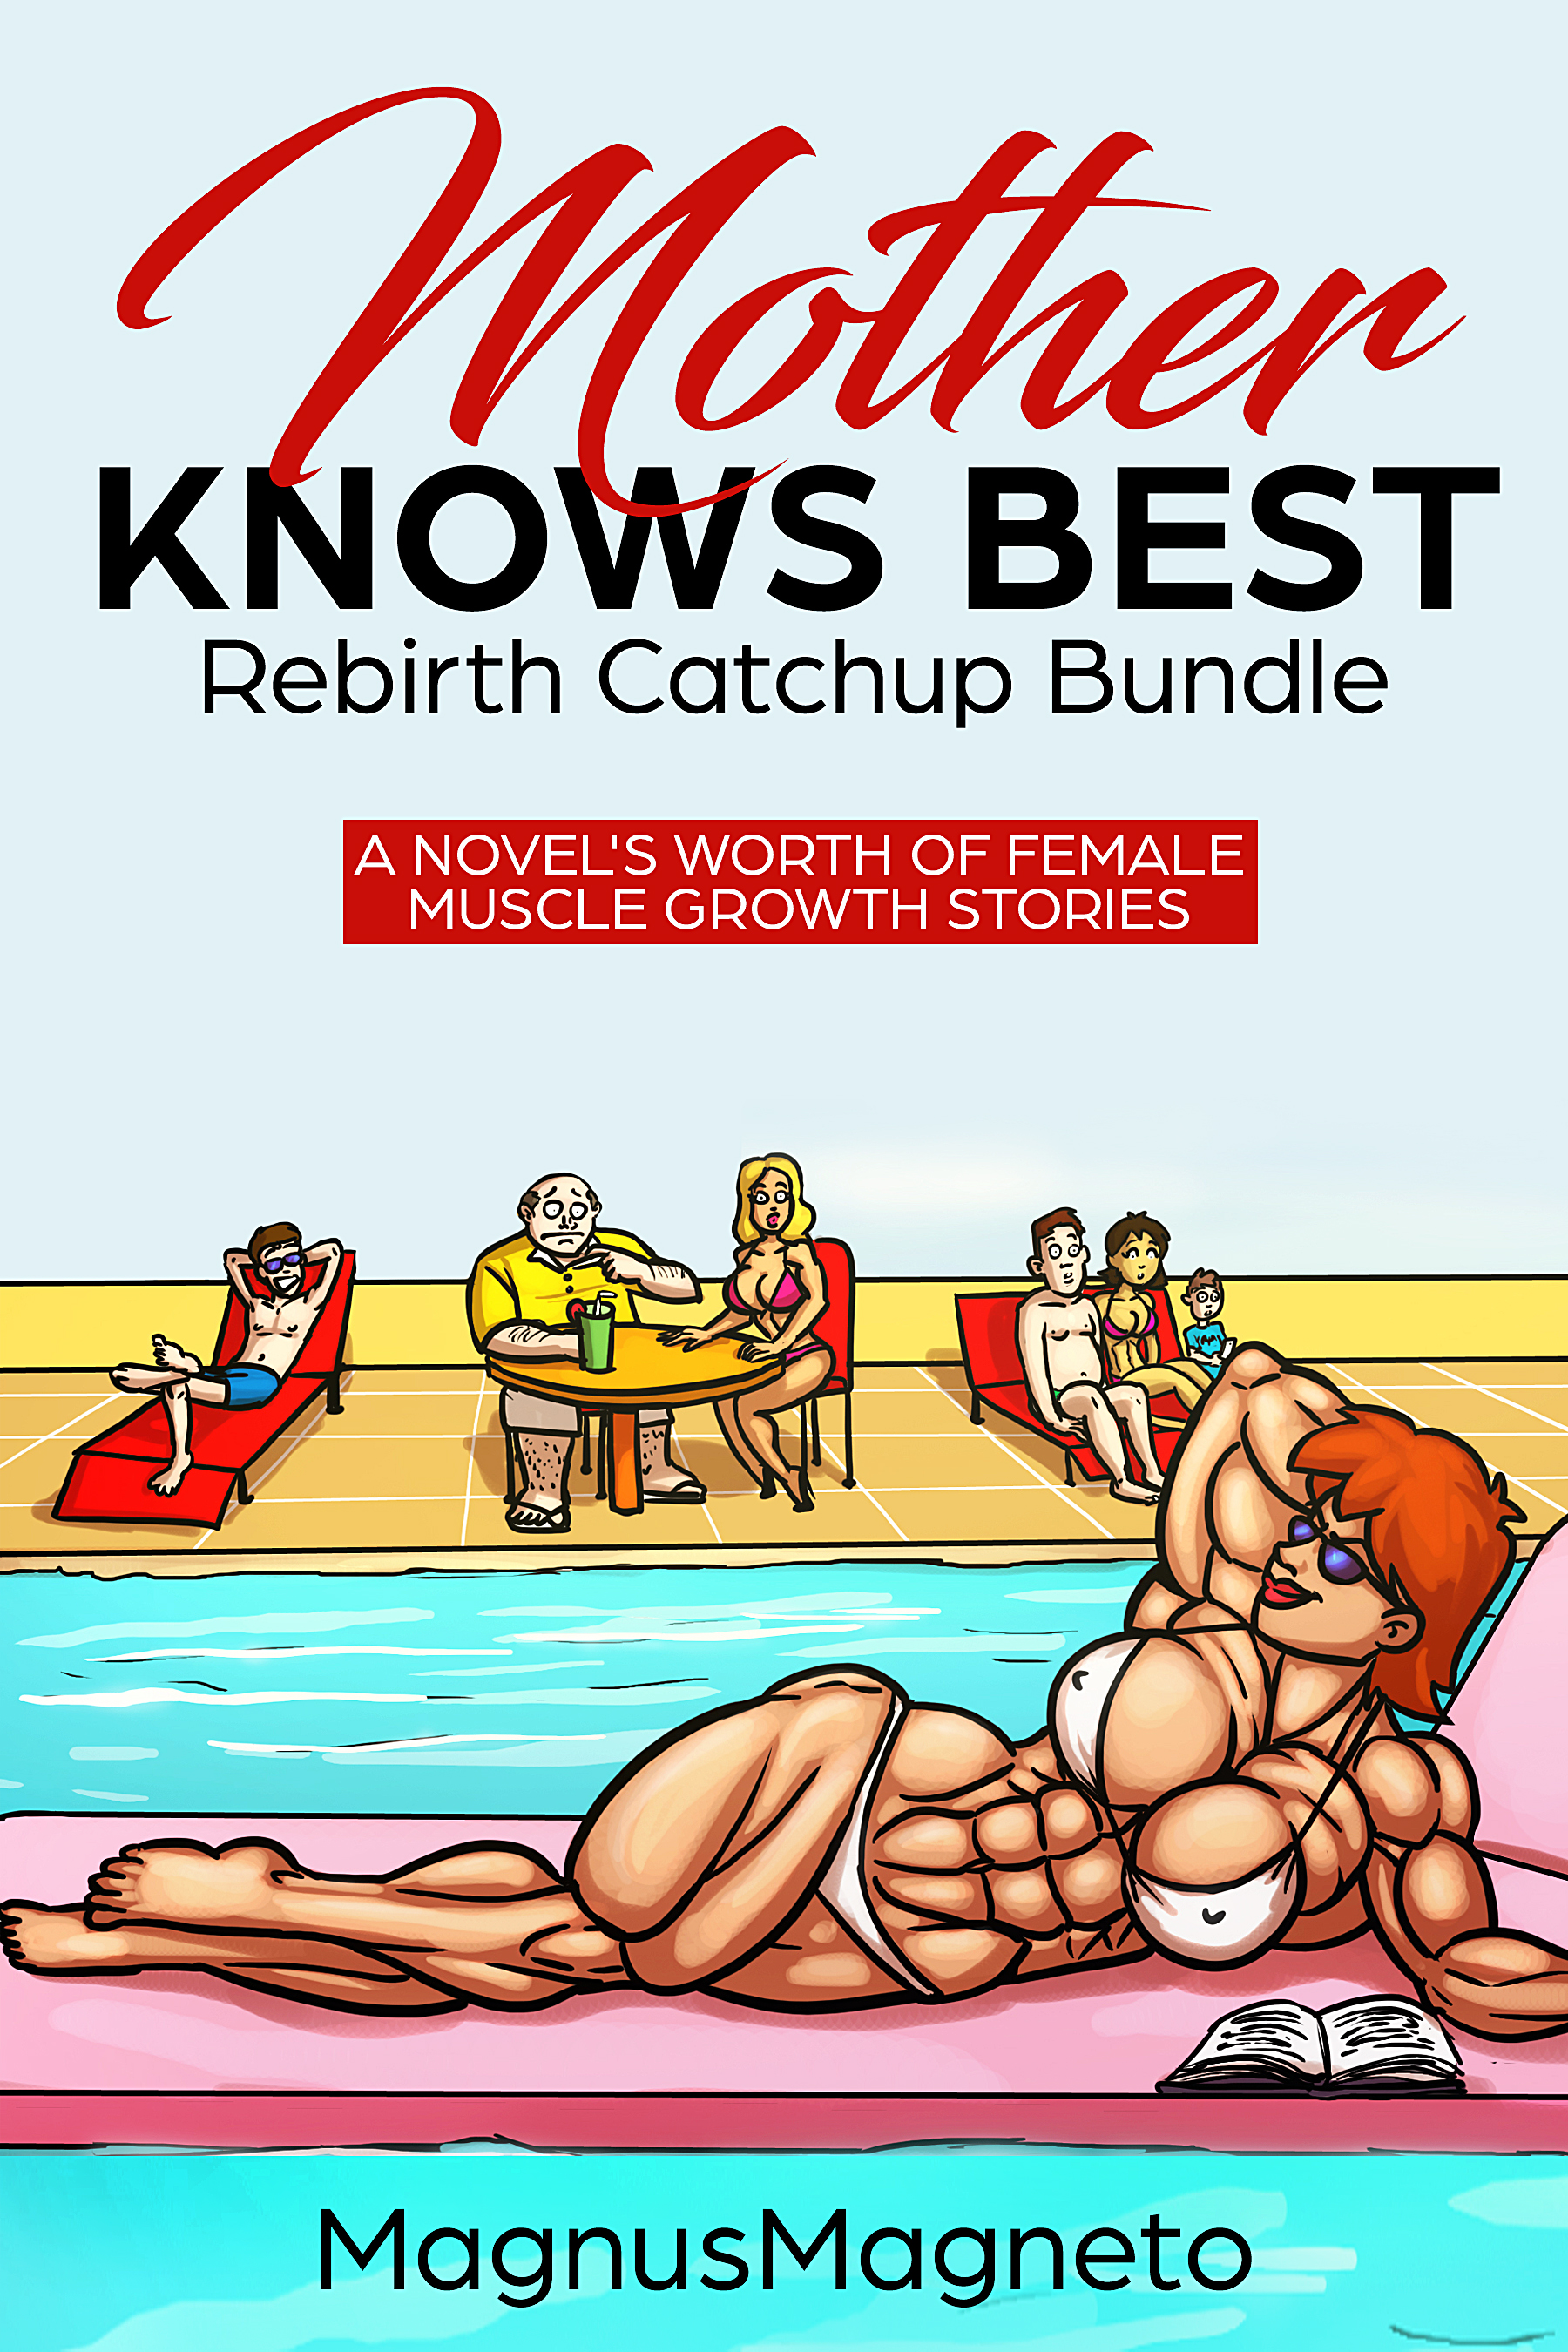 art for female muscle growth story bundle mother knows best rebirth by magnusmagneto